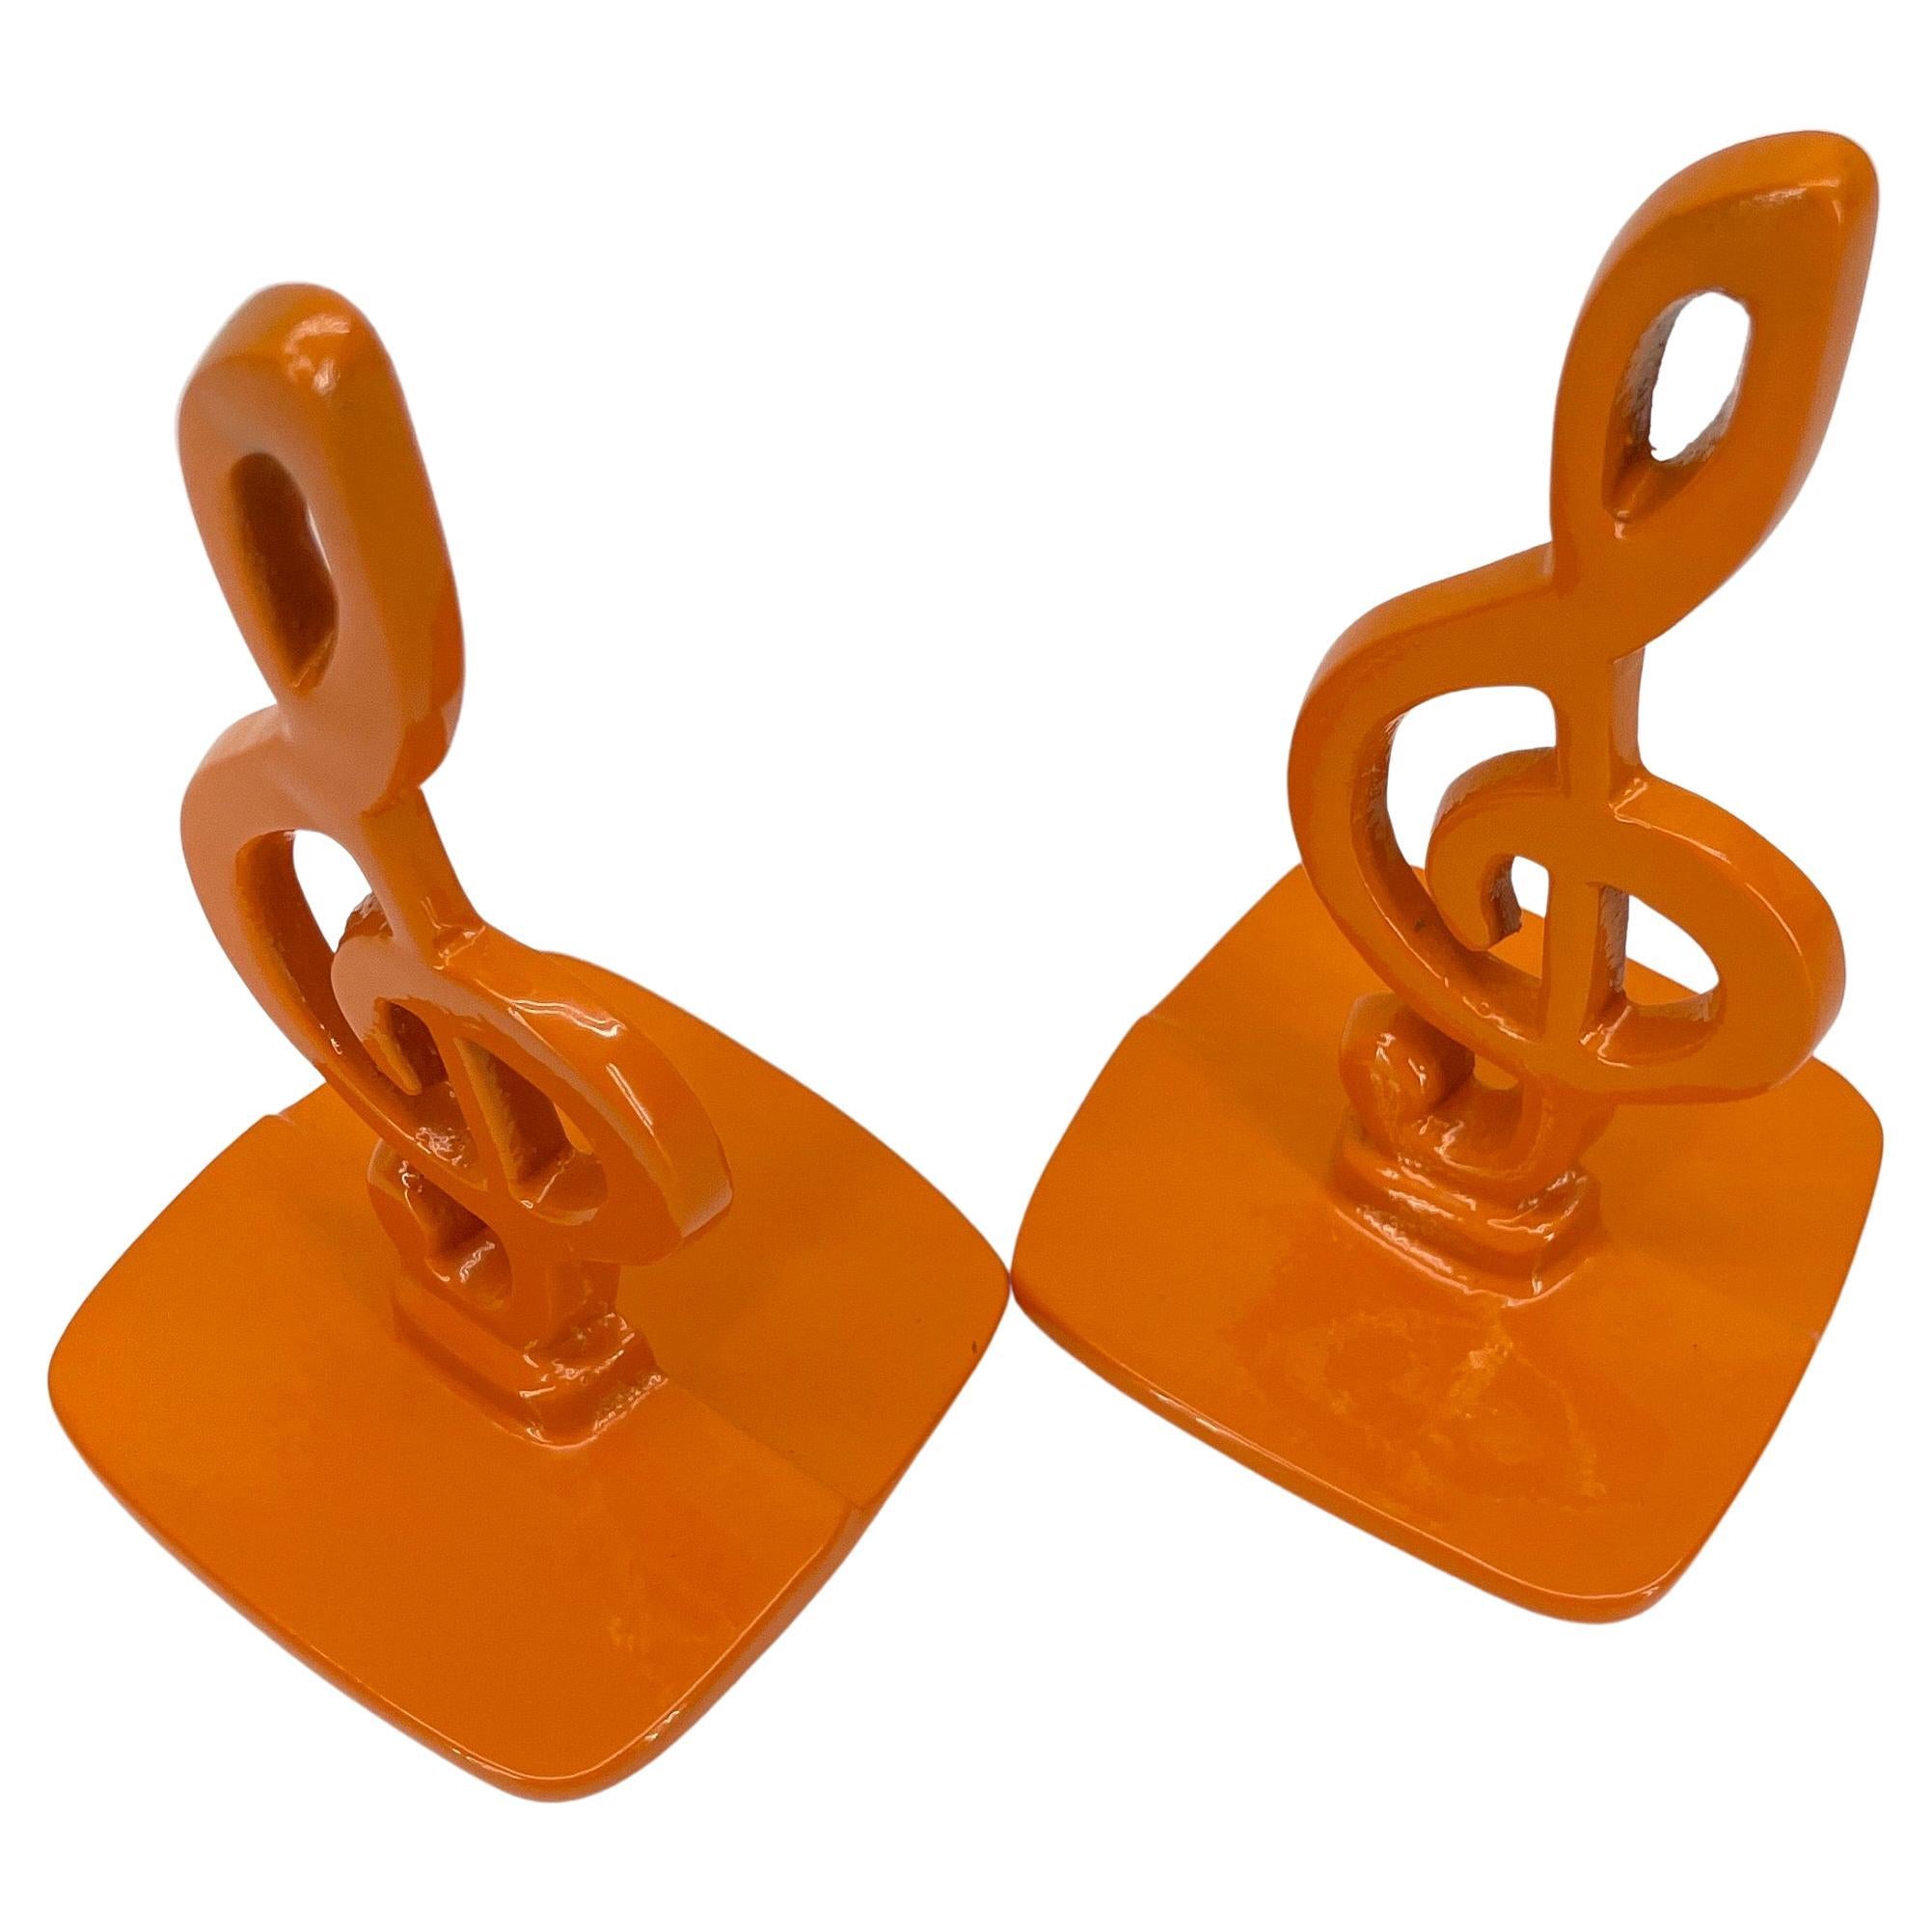 Vintage Pair of Music Note Bookends, Powder-Coated Orange  In Good Condition For Sale In Haddonfield, NJ